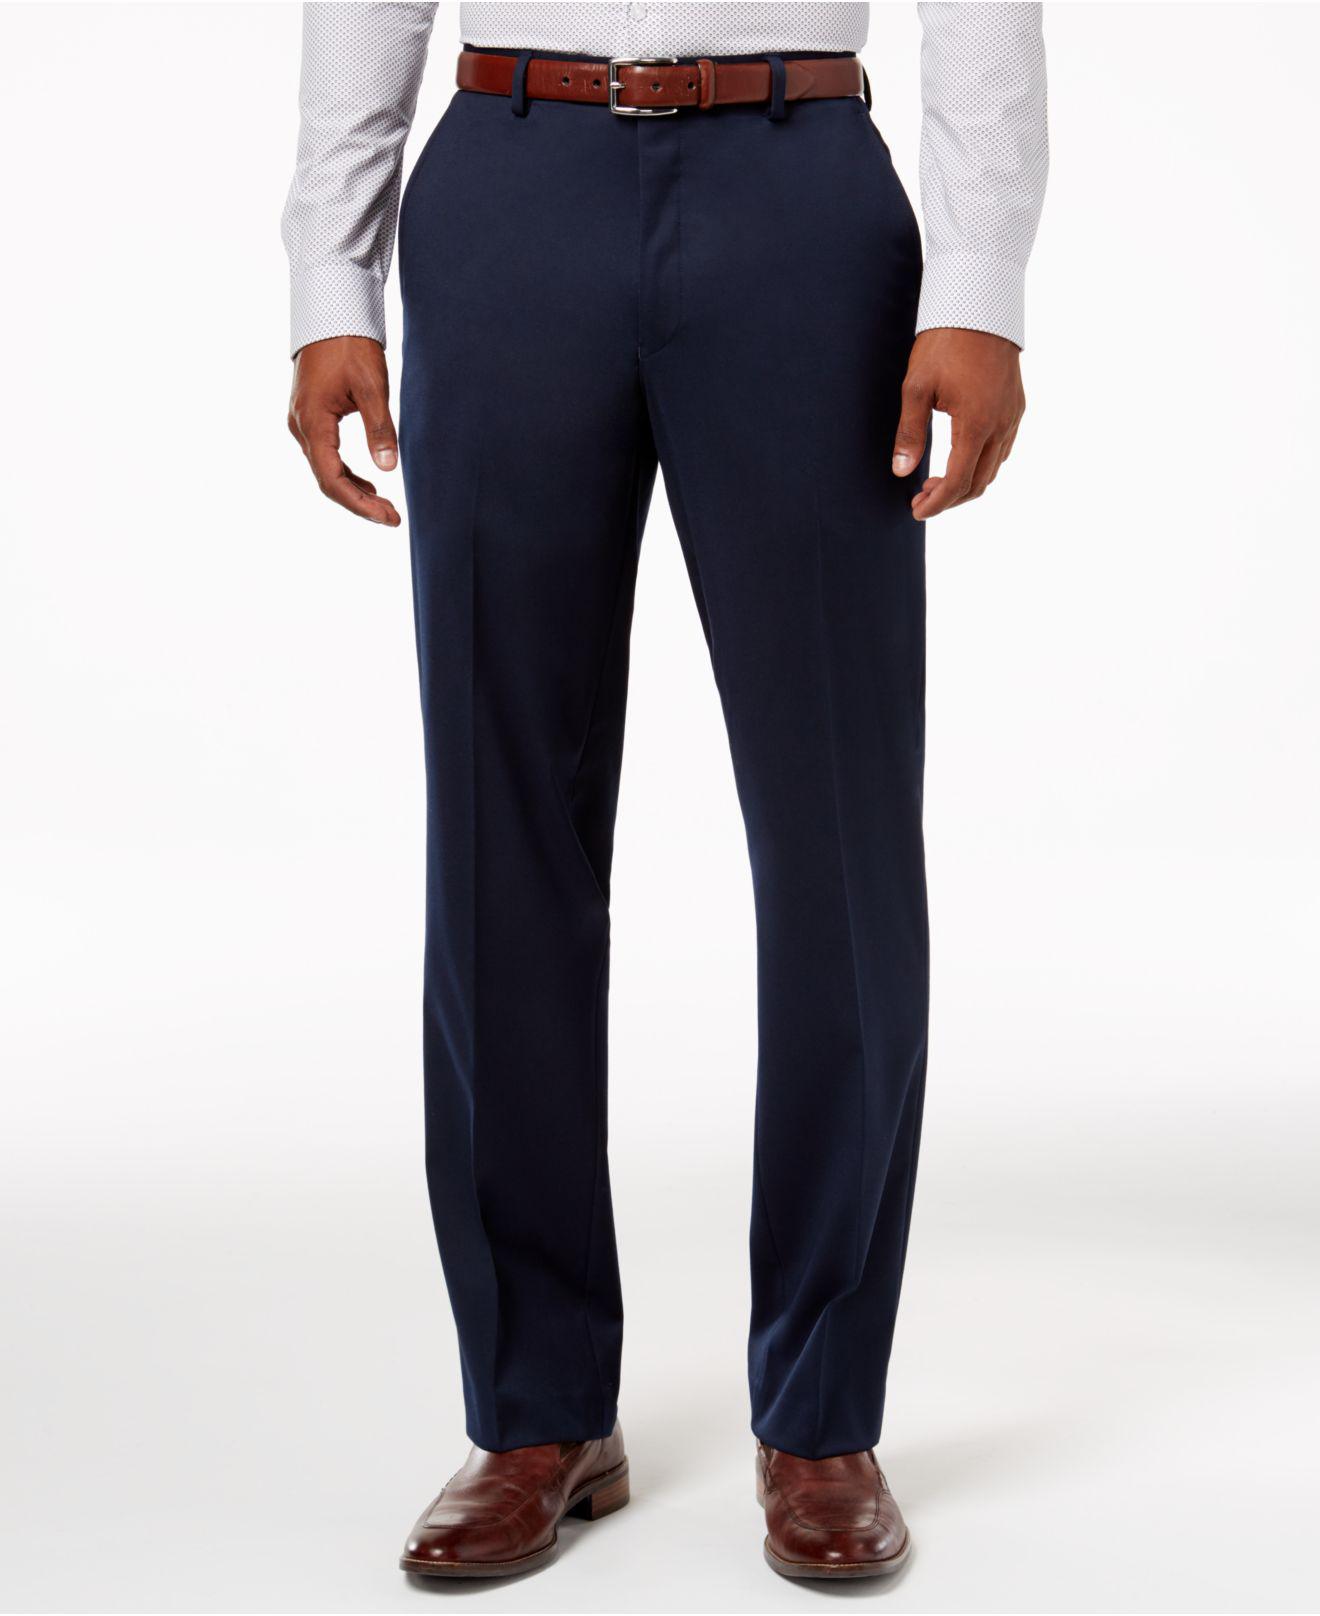 Lyst - Alfani Traveler Navy Solid Classic-fit Pants, Created For Macy's ...